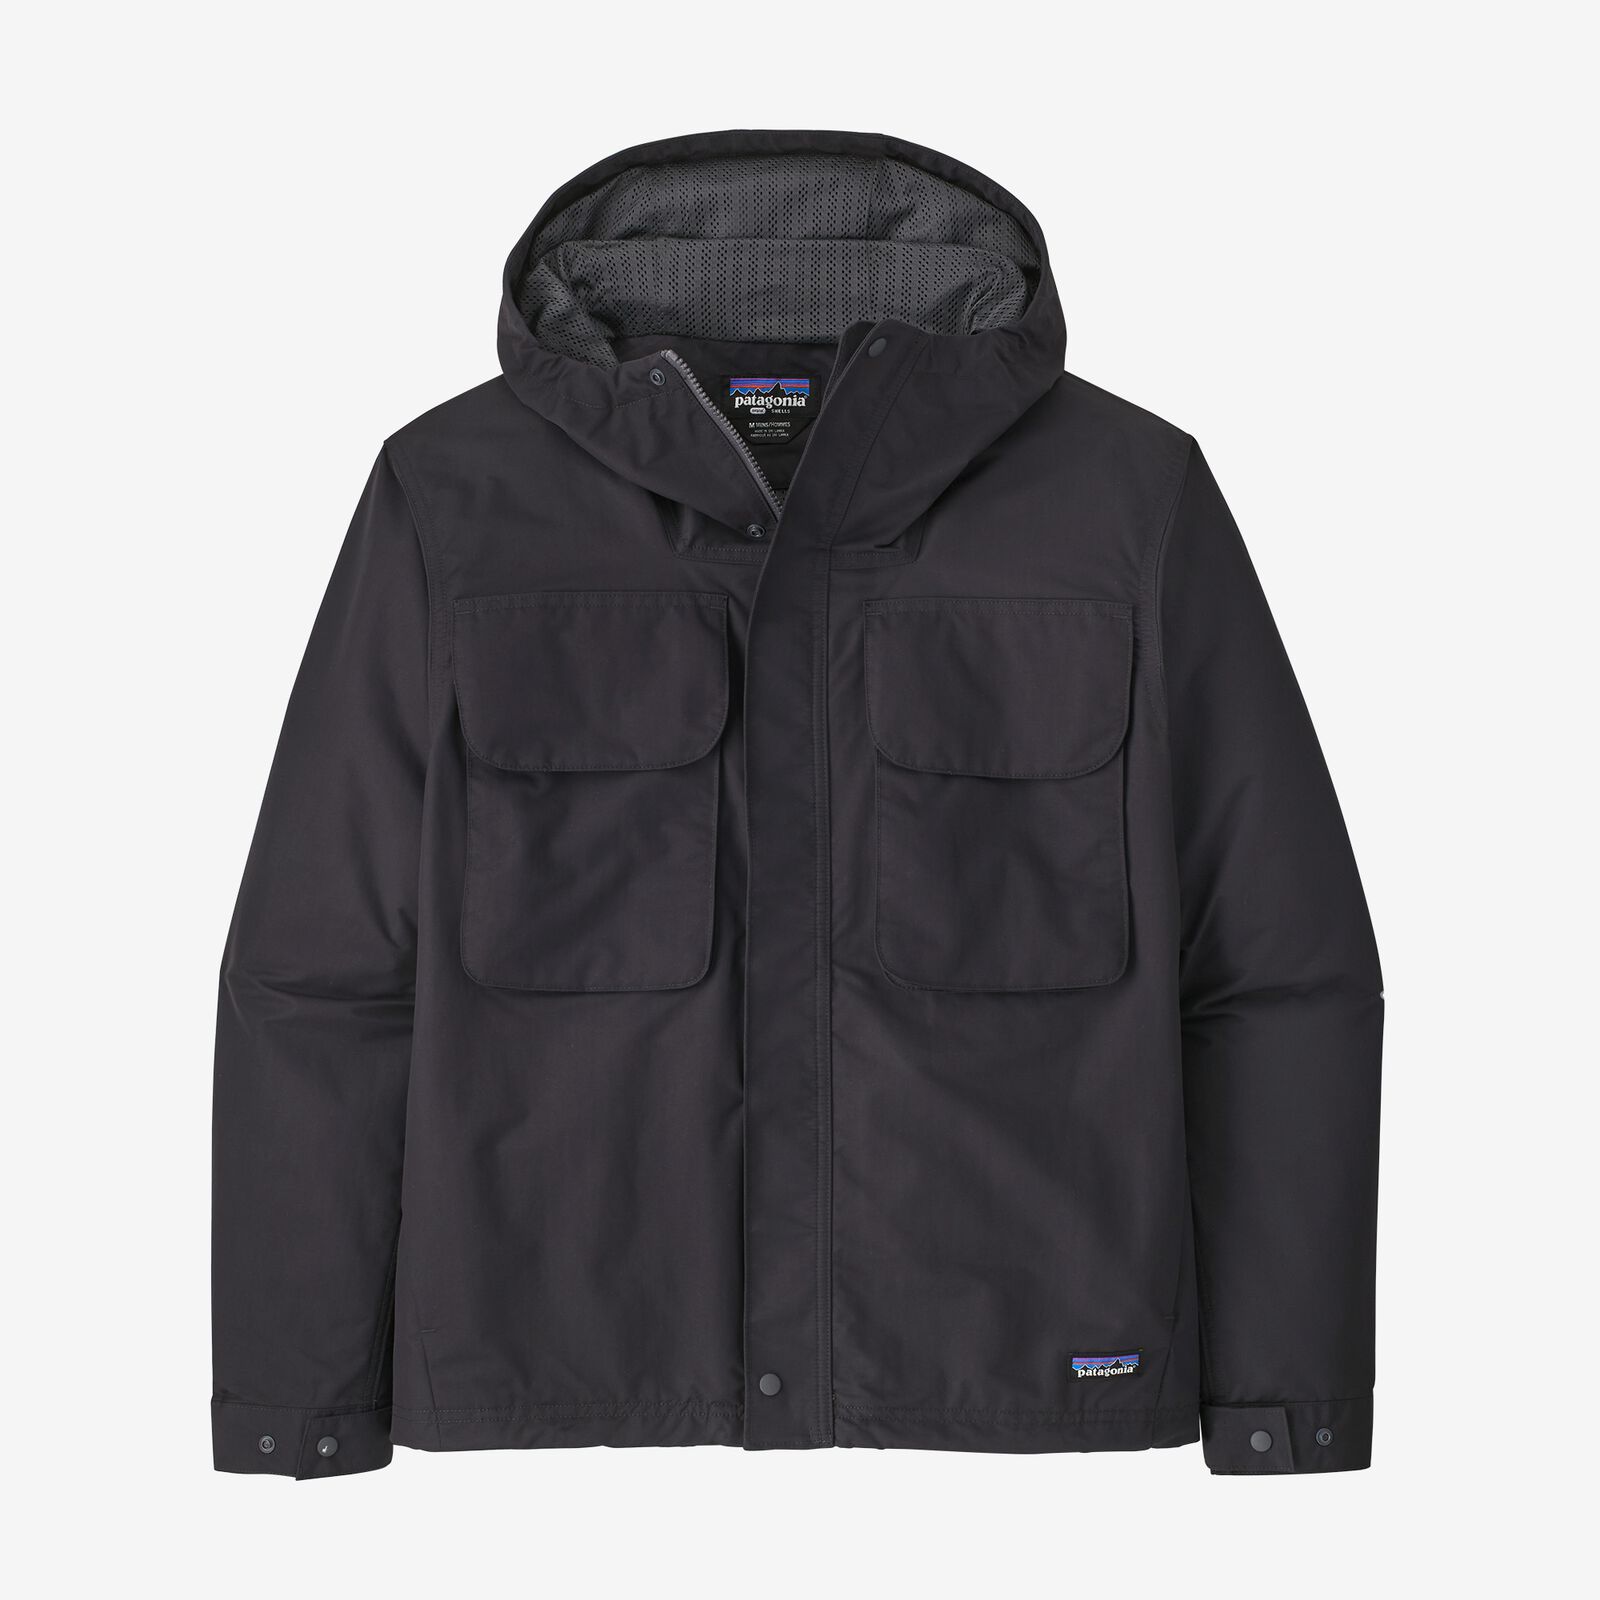 【OUTLET】patagonia パタゴニア メンズ・イスマス ...